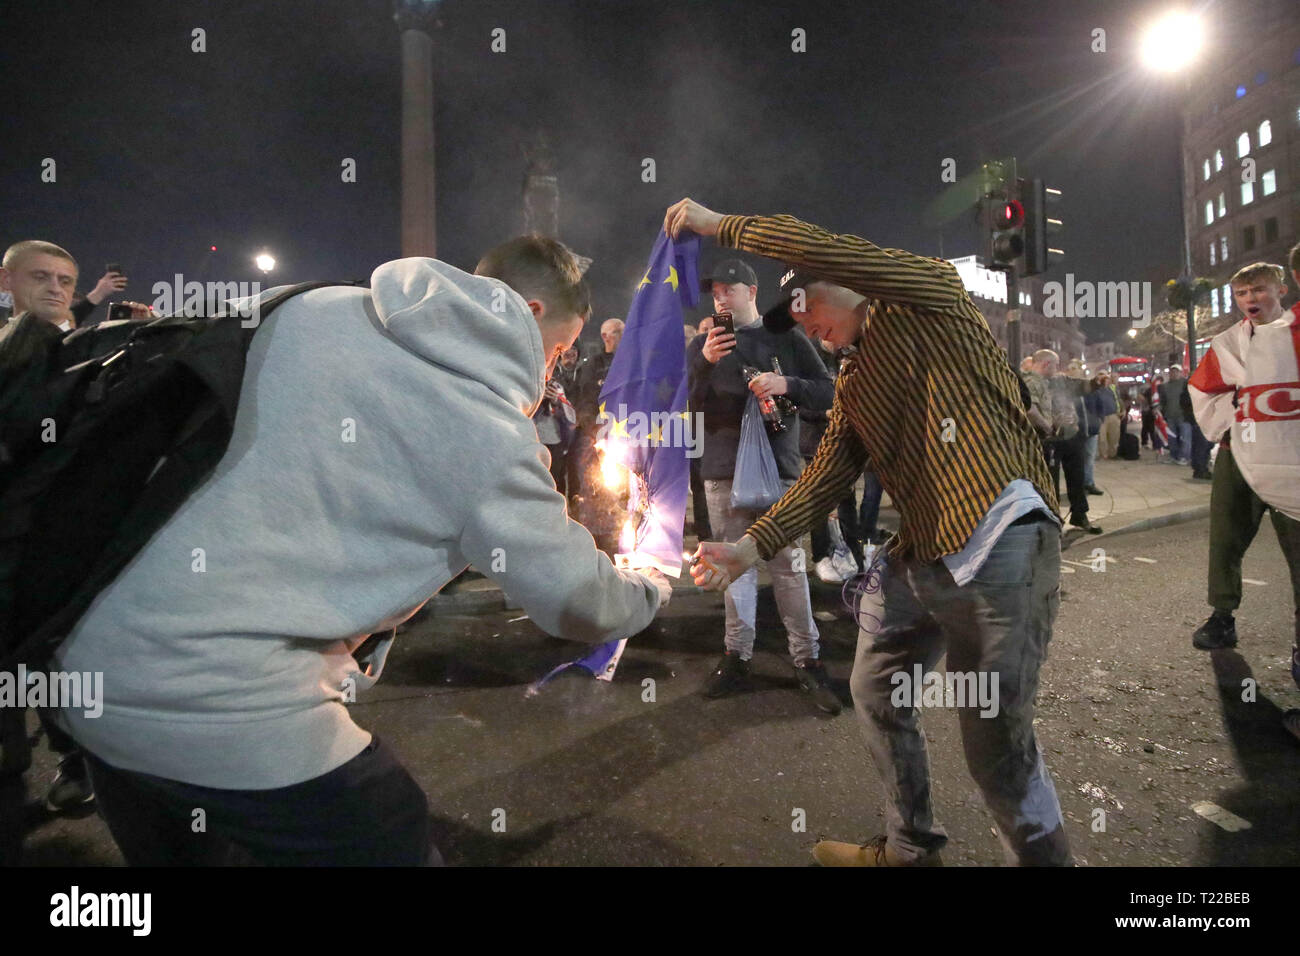 Pro-Brexit supporters burn a EU flag near to Trafalgar Square in central London, following the March to Leave protest. Stock Photo